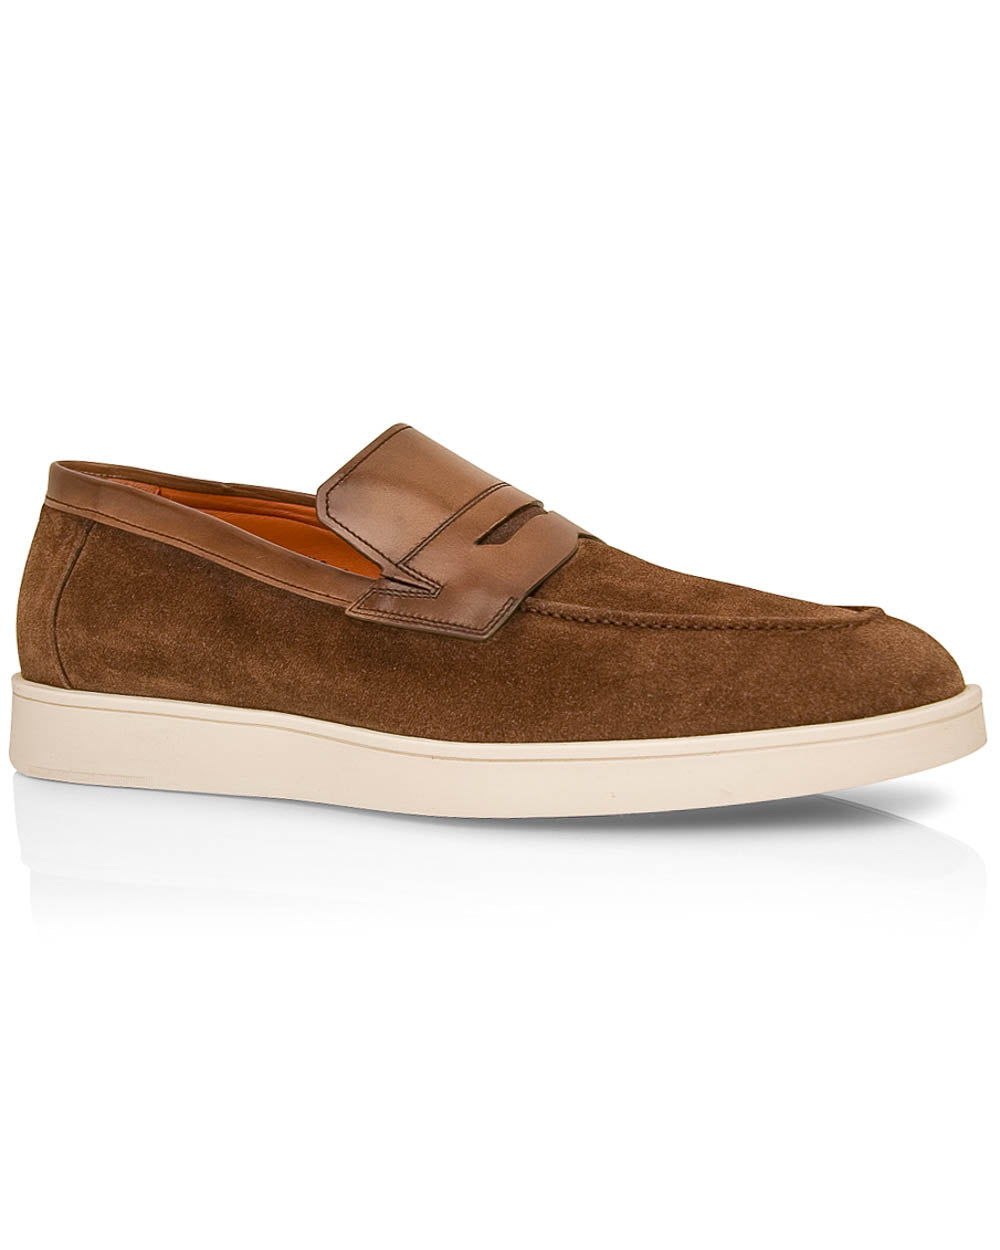 Baba Suede Loafer in Brown